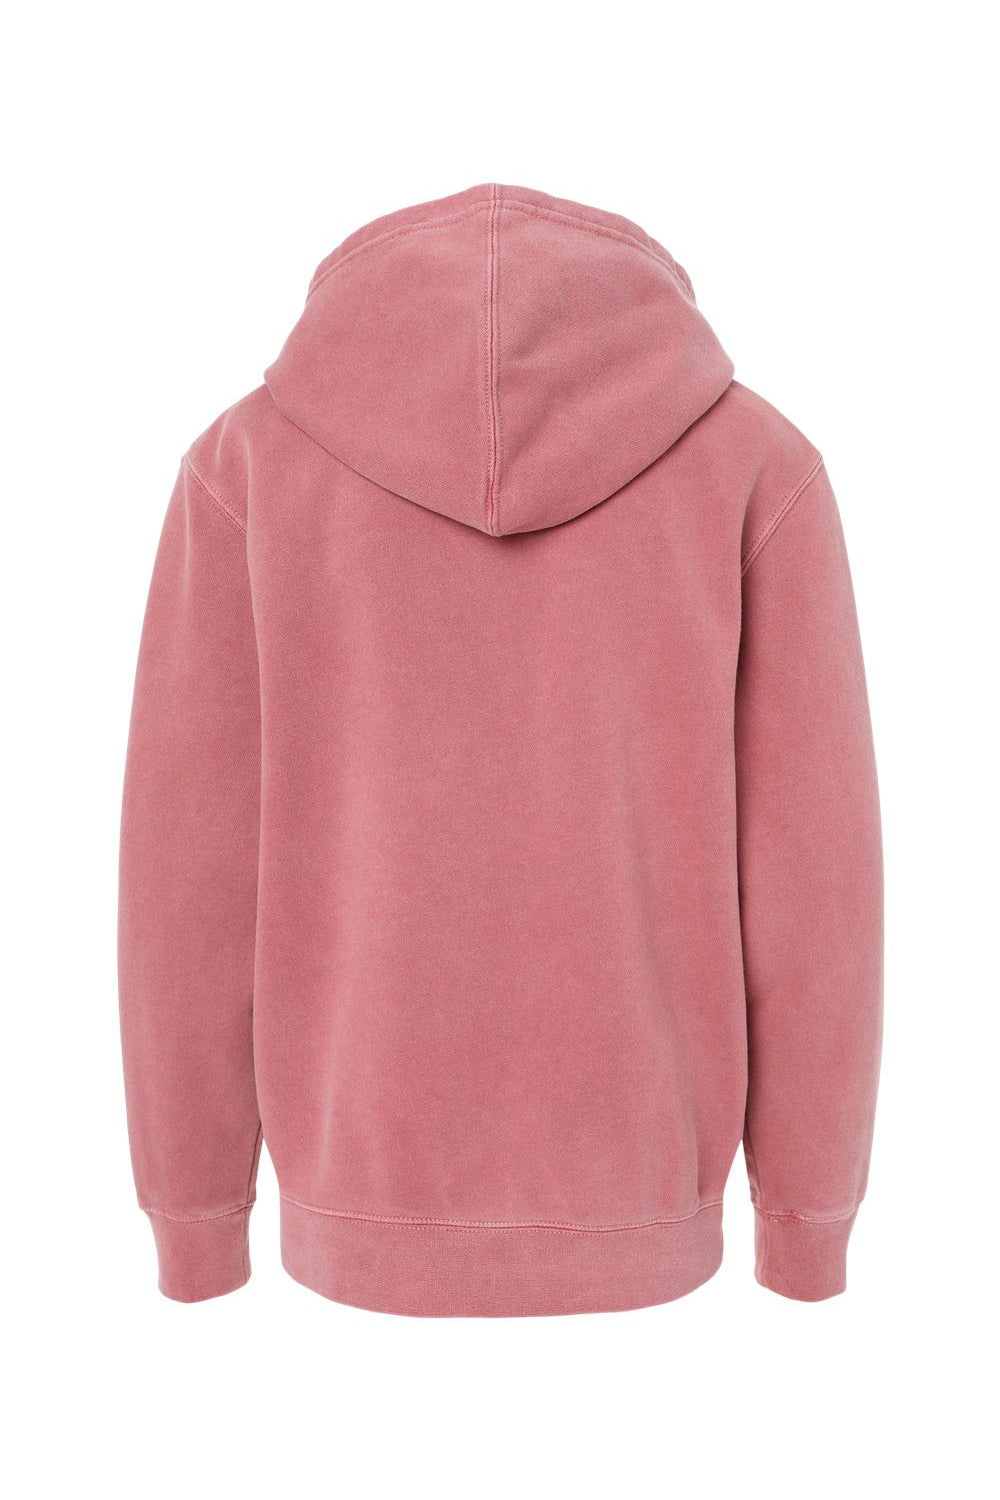 Independent Trading Co. PRM1500Y Youth Pigment Dyed Hooded Sweatshirt Hoodie Maroon Flat Back